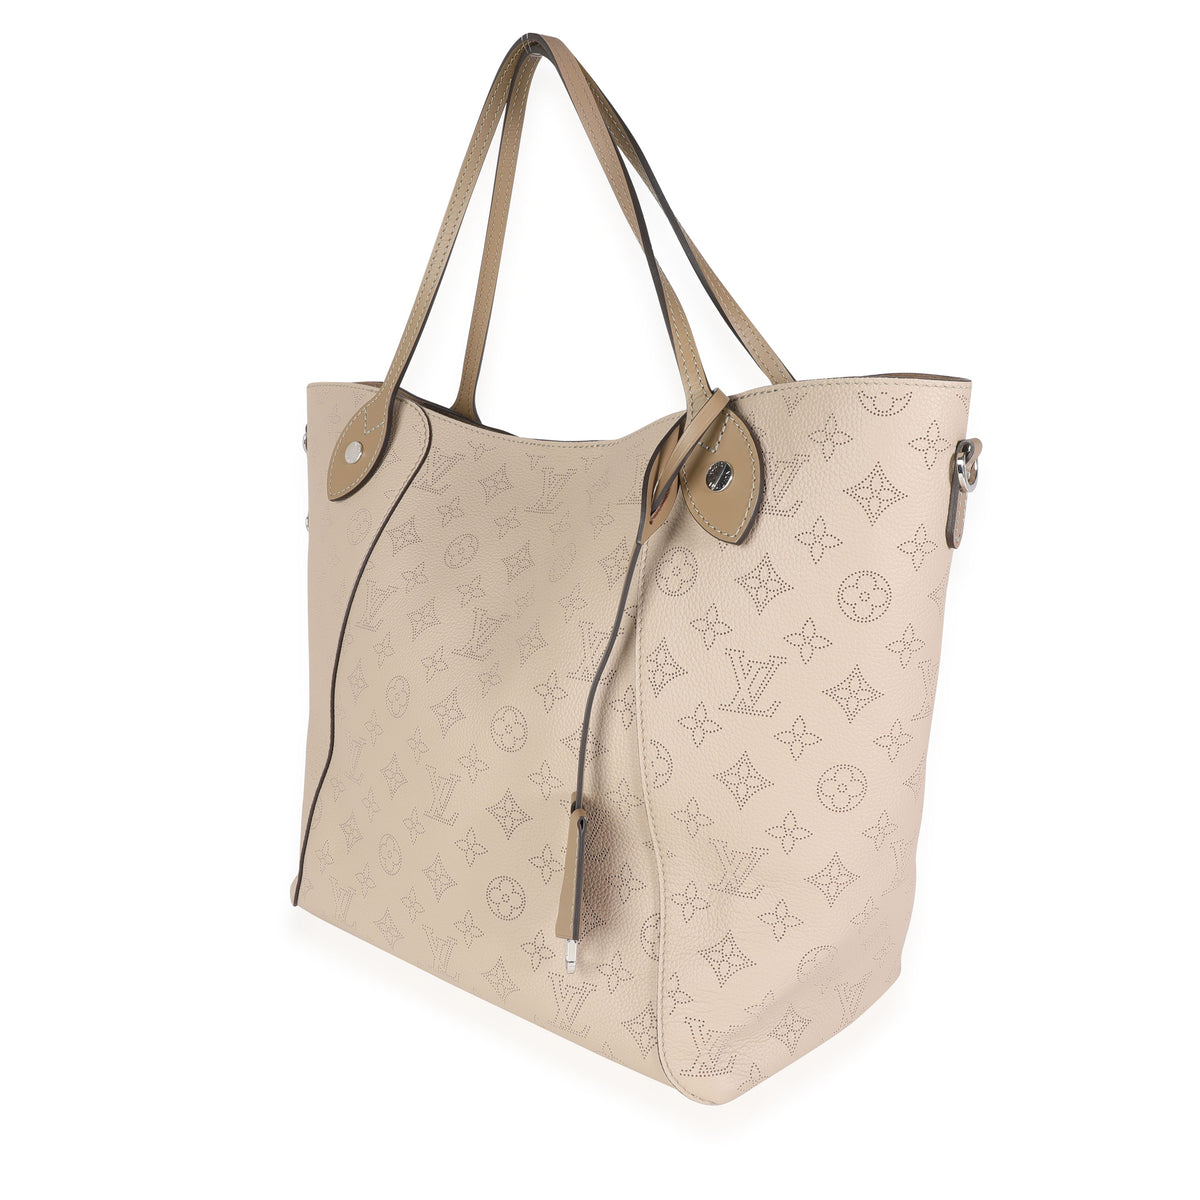 Louis Vuitton Hina Mm in Gray